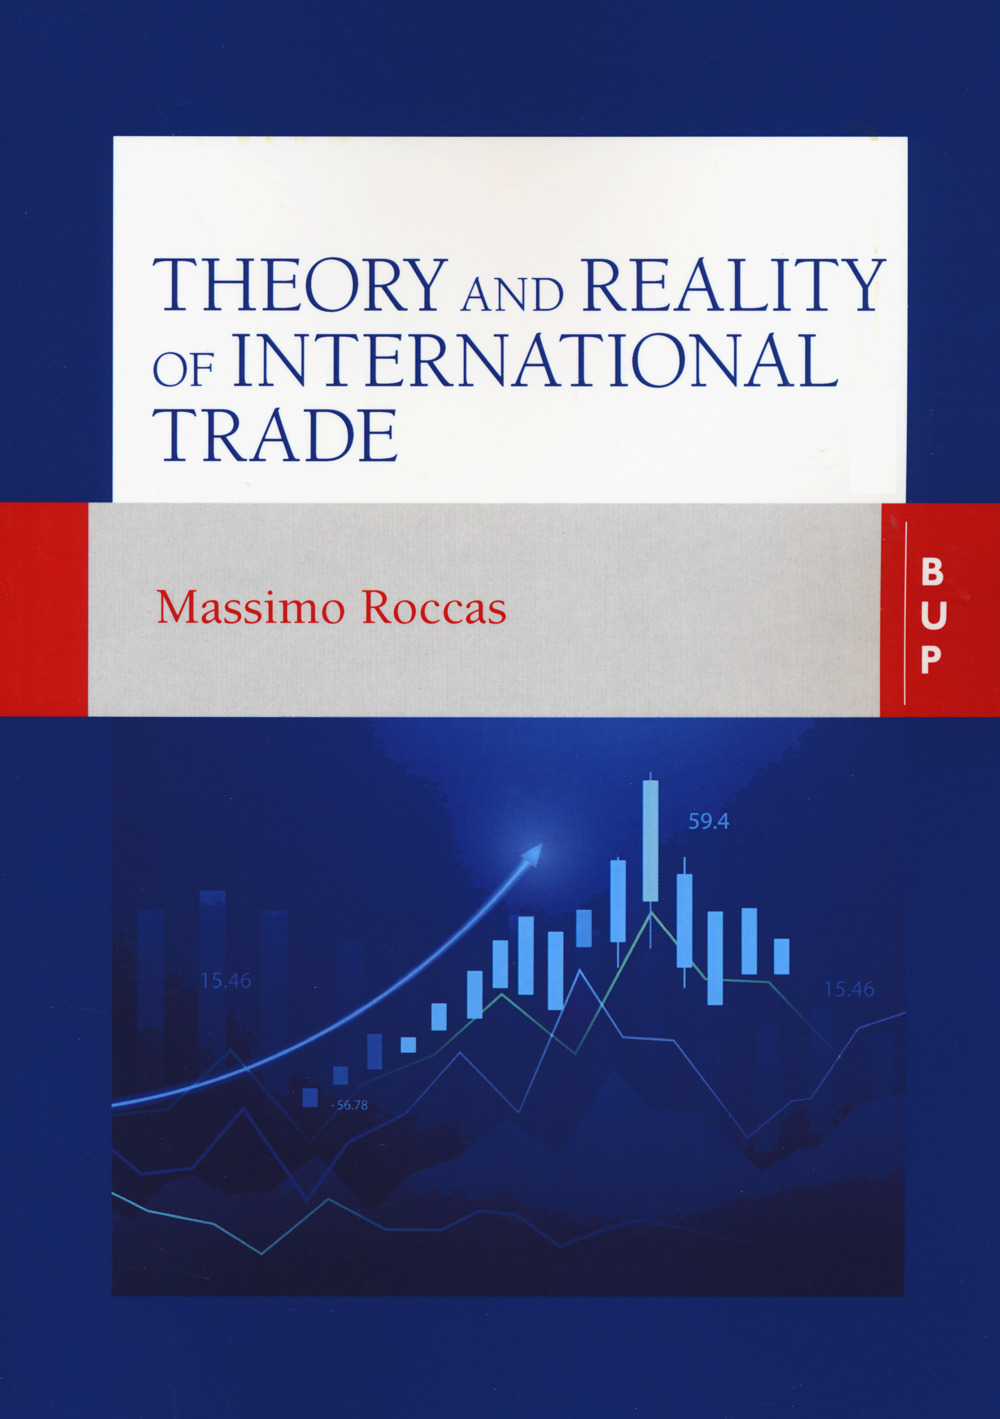 Theory and reality of international trade